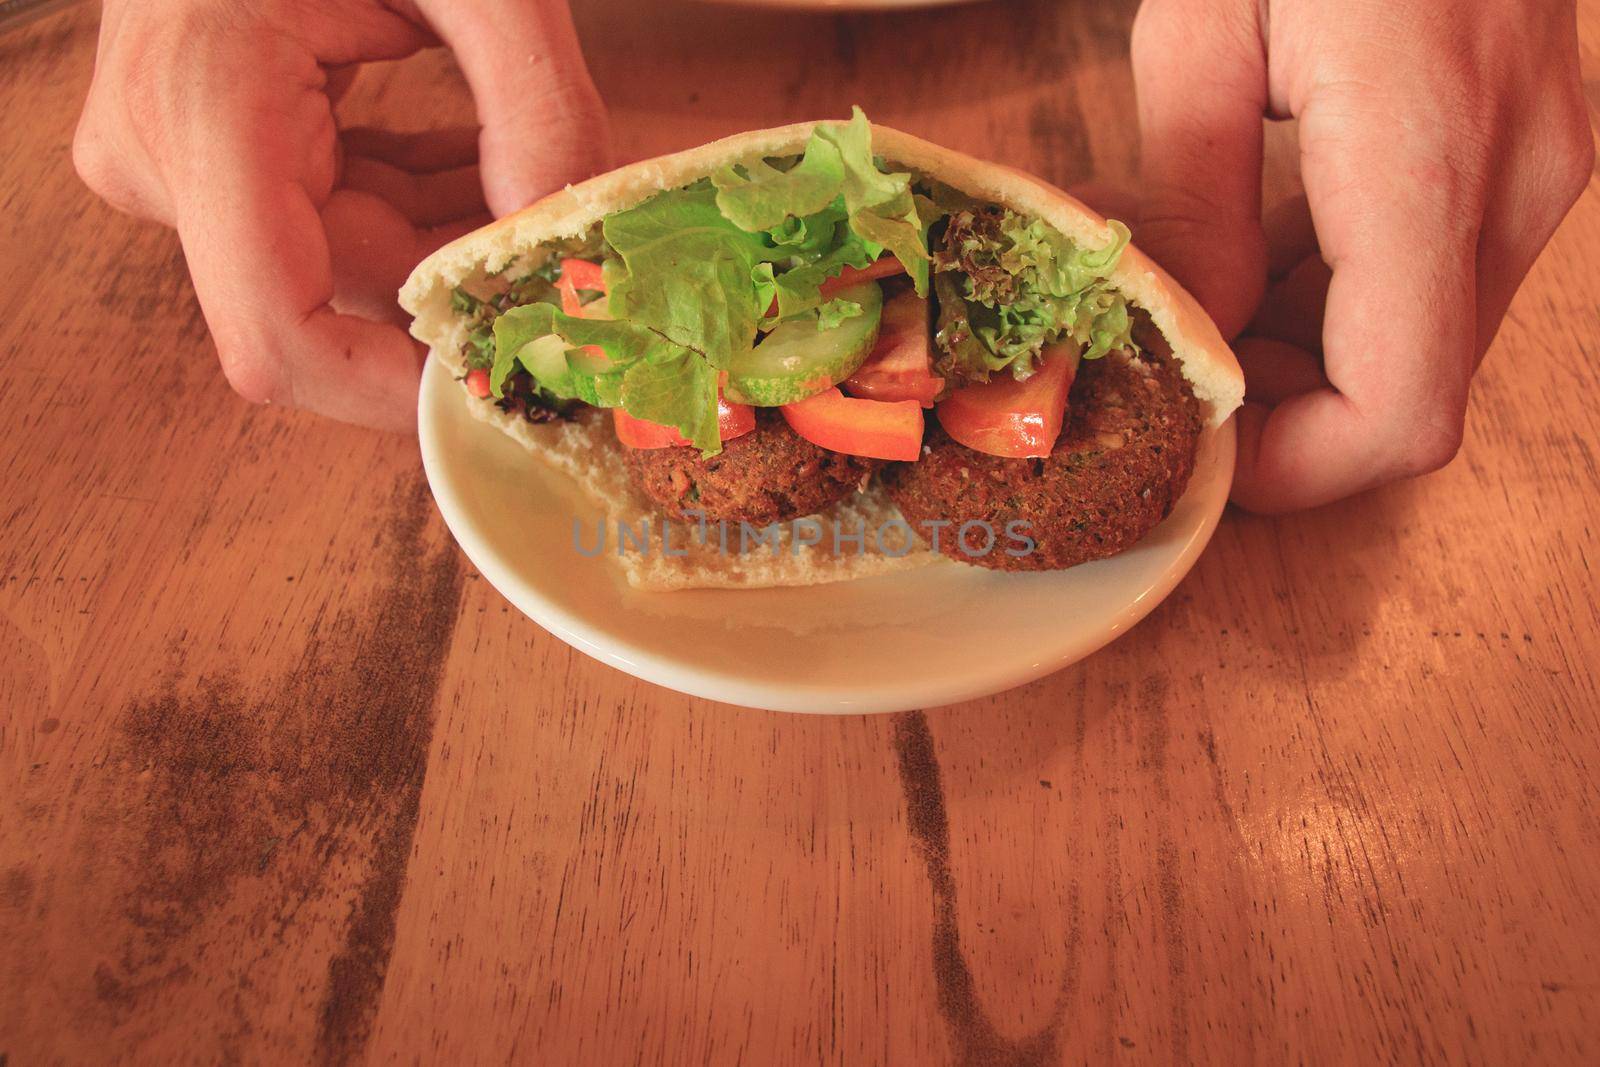 A serving of pita bread stuffed with falafel and fresh vegetable salad, vegan breakfast for a more sustainable and healthy lifestyle